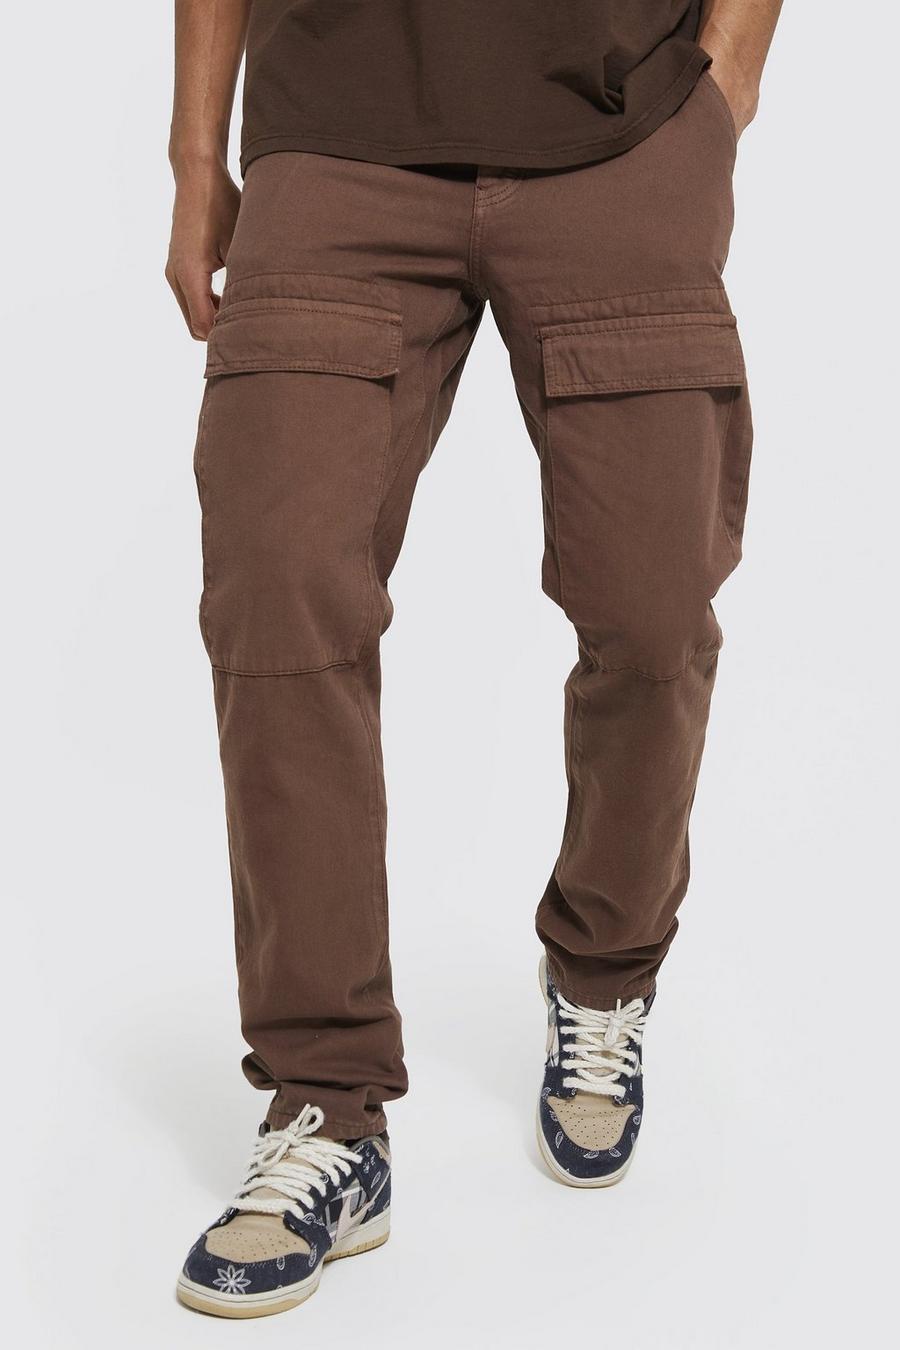 Chocolate brown Tall Straight Leg Front Cargo Pocket Jean